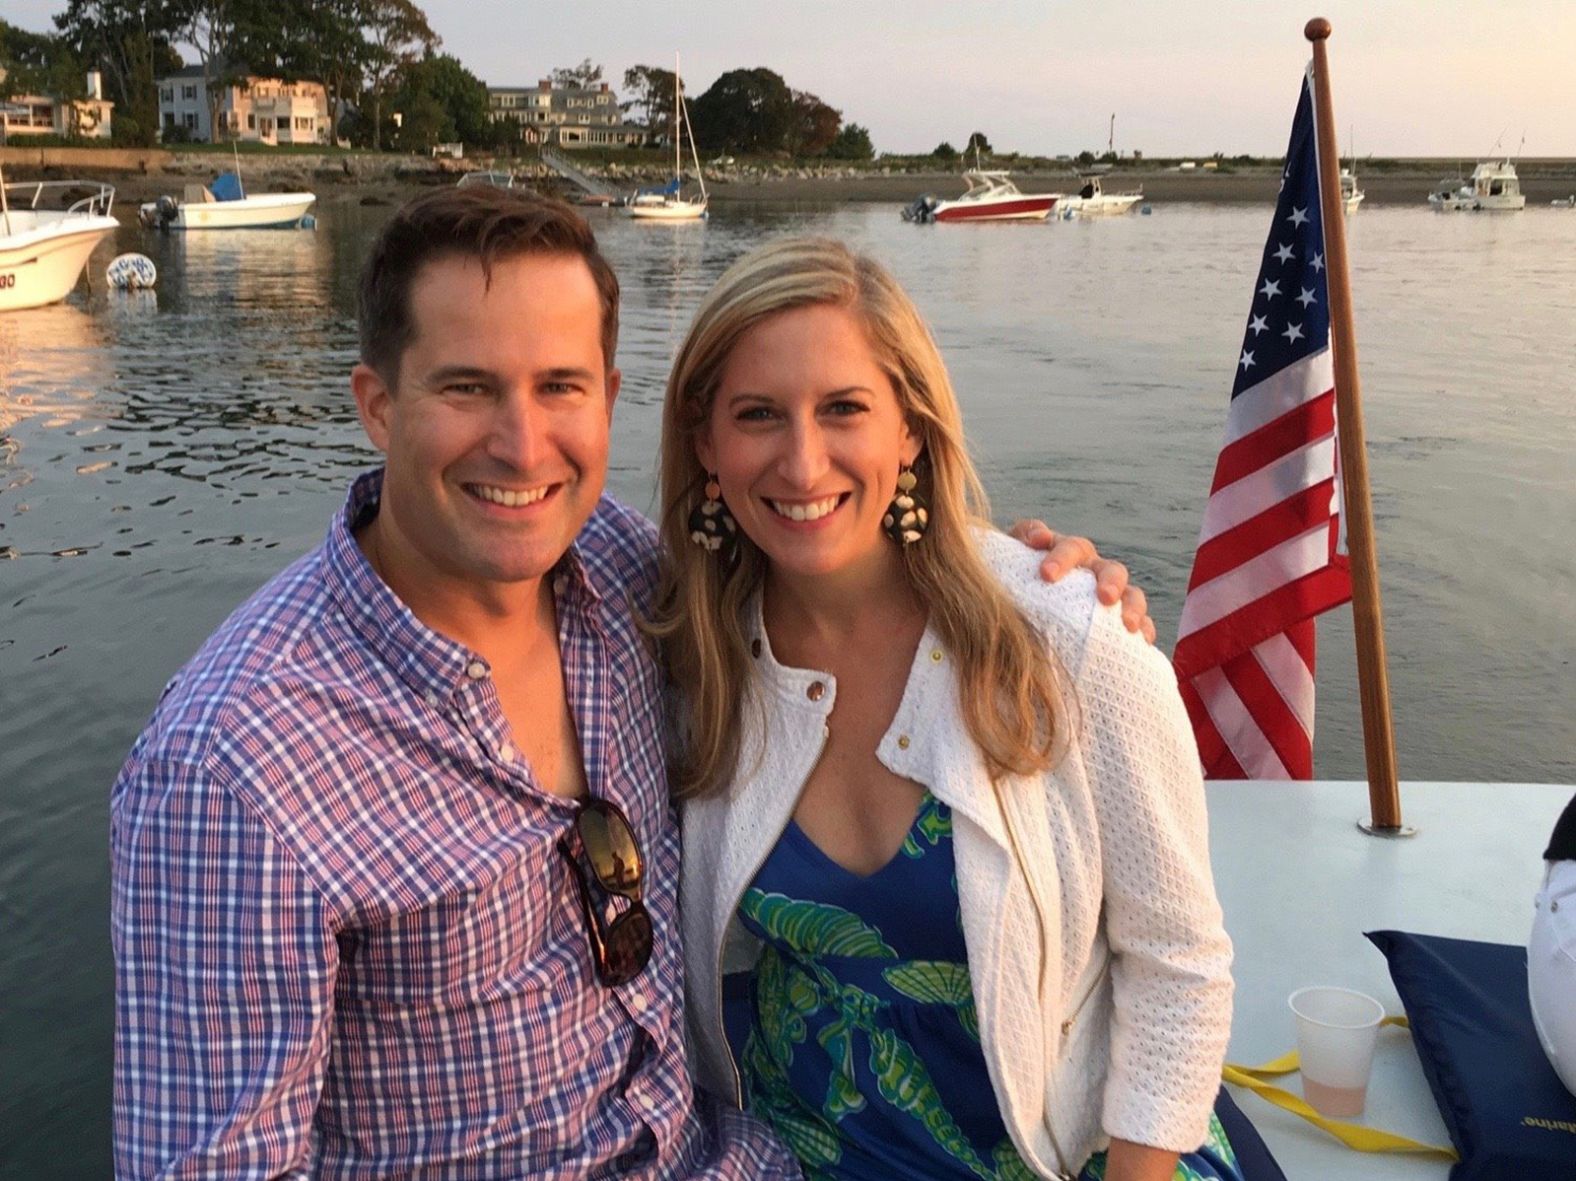 Moulton and his wife, Liz, in a photo <a href="index.php?page=&url=https%3A%2F%2Fwww.facebook.com%2FSethMoulton%2Fphotos%2Fa.270602479745362%2F1033836170088652%2F%3Ftype%3D3%26theater" target="_blank" target="_blank">he posted to Facebook</a> in January 2018.